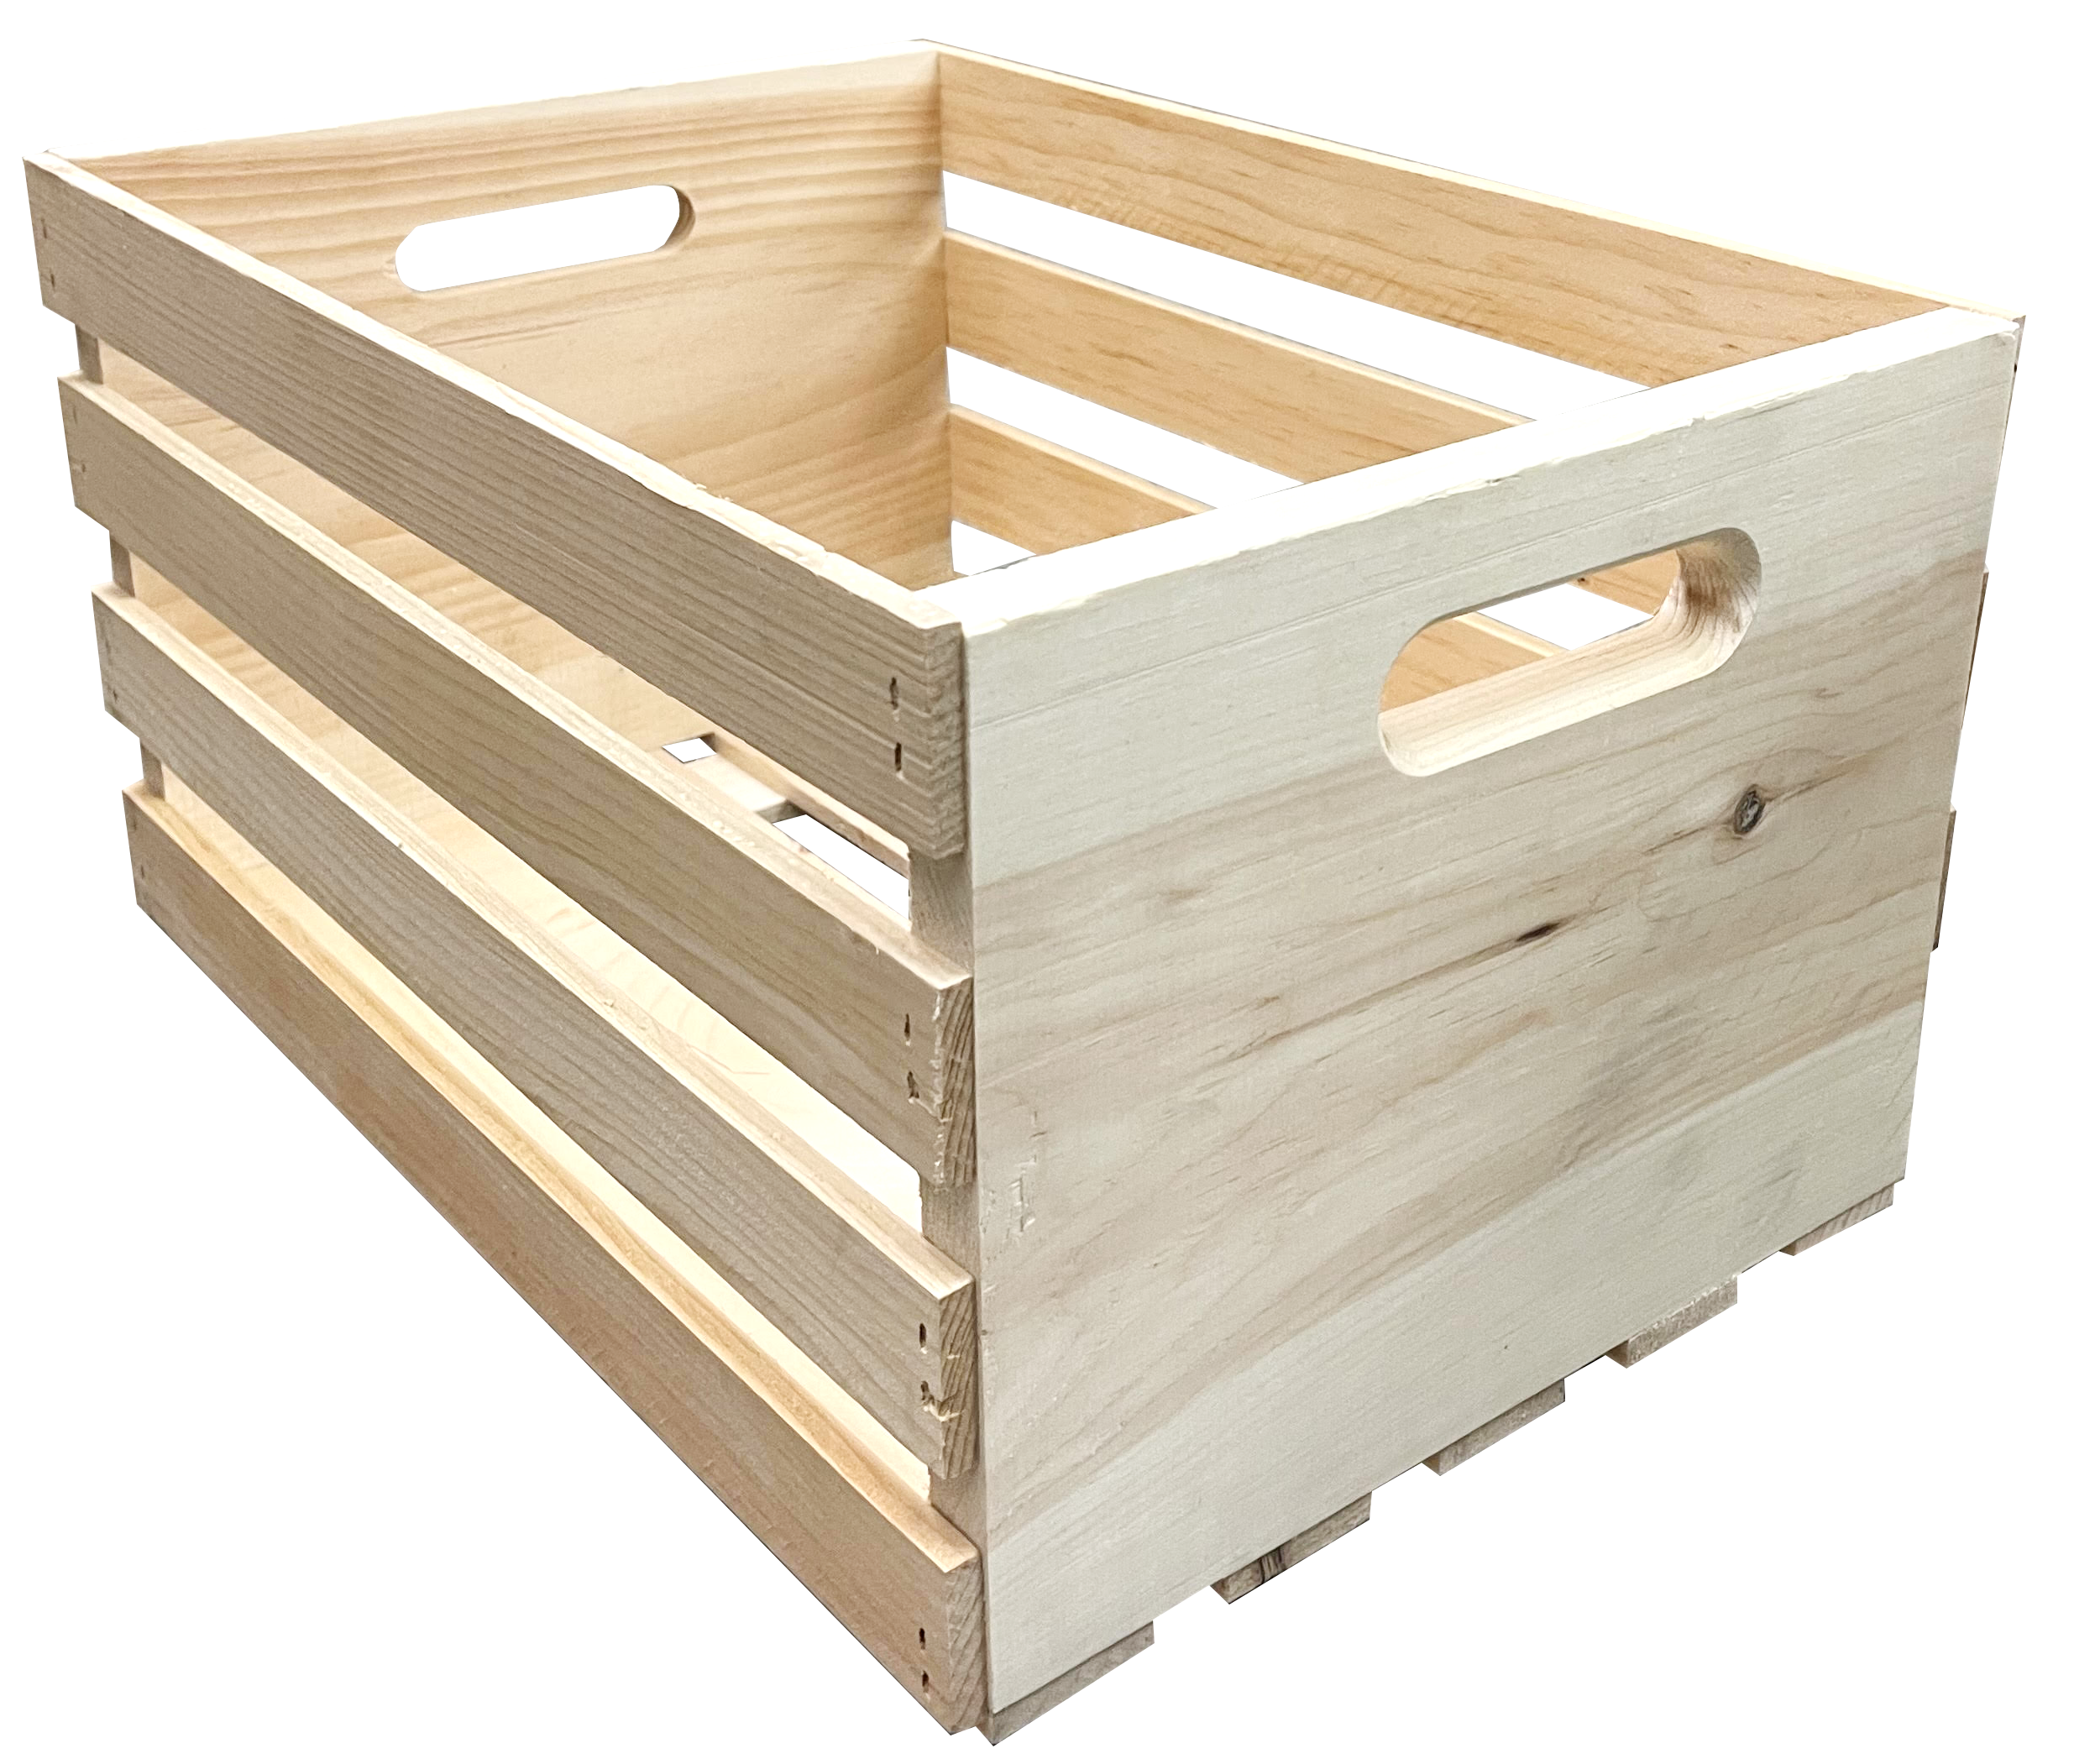 How to Make an Easy Wooden Crate Shelf (DIY) - Family Handyman